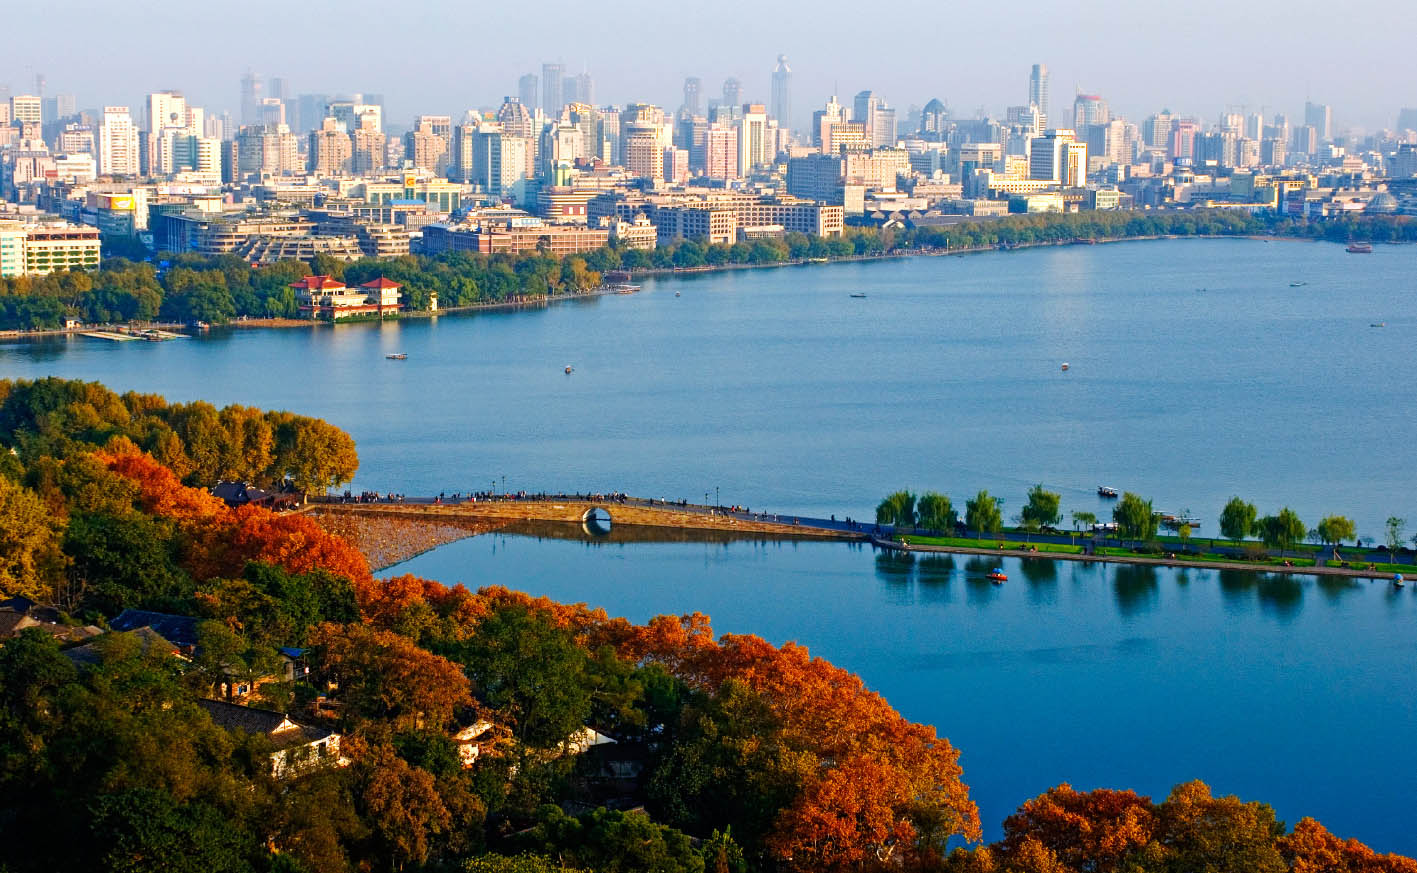 Is Hangzhou an expensive city?